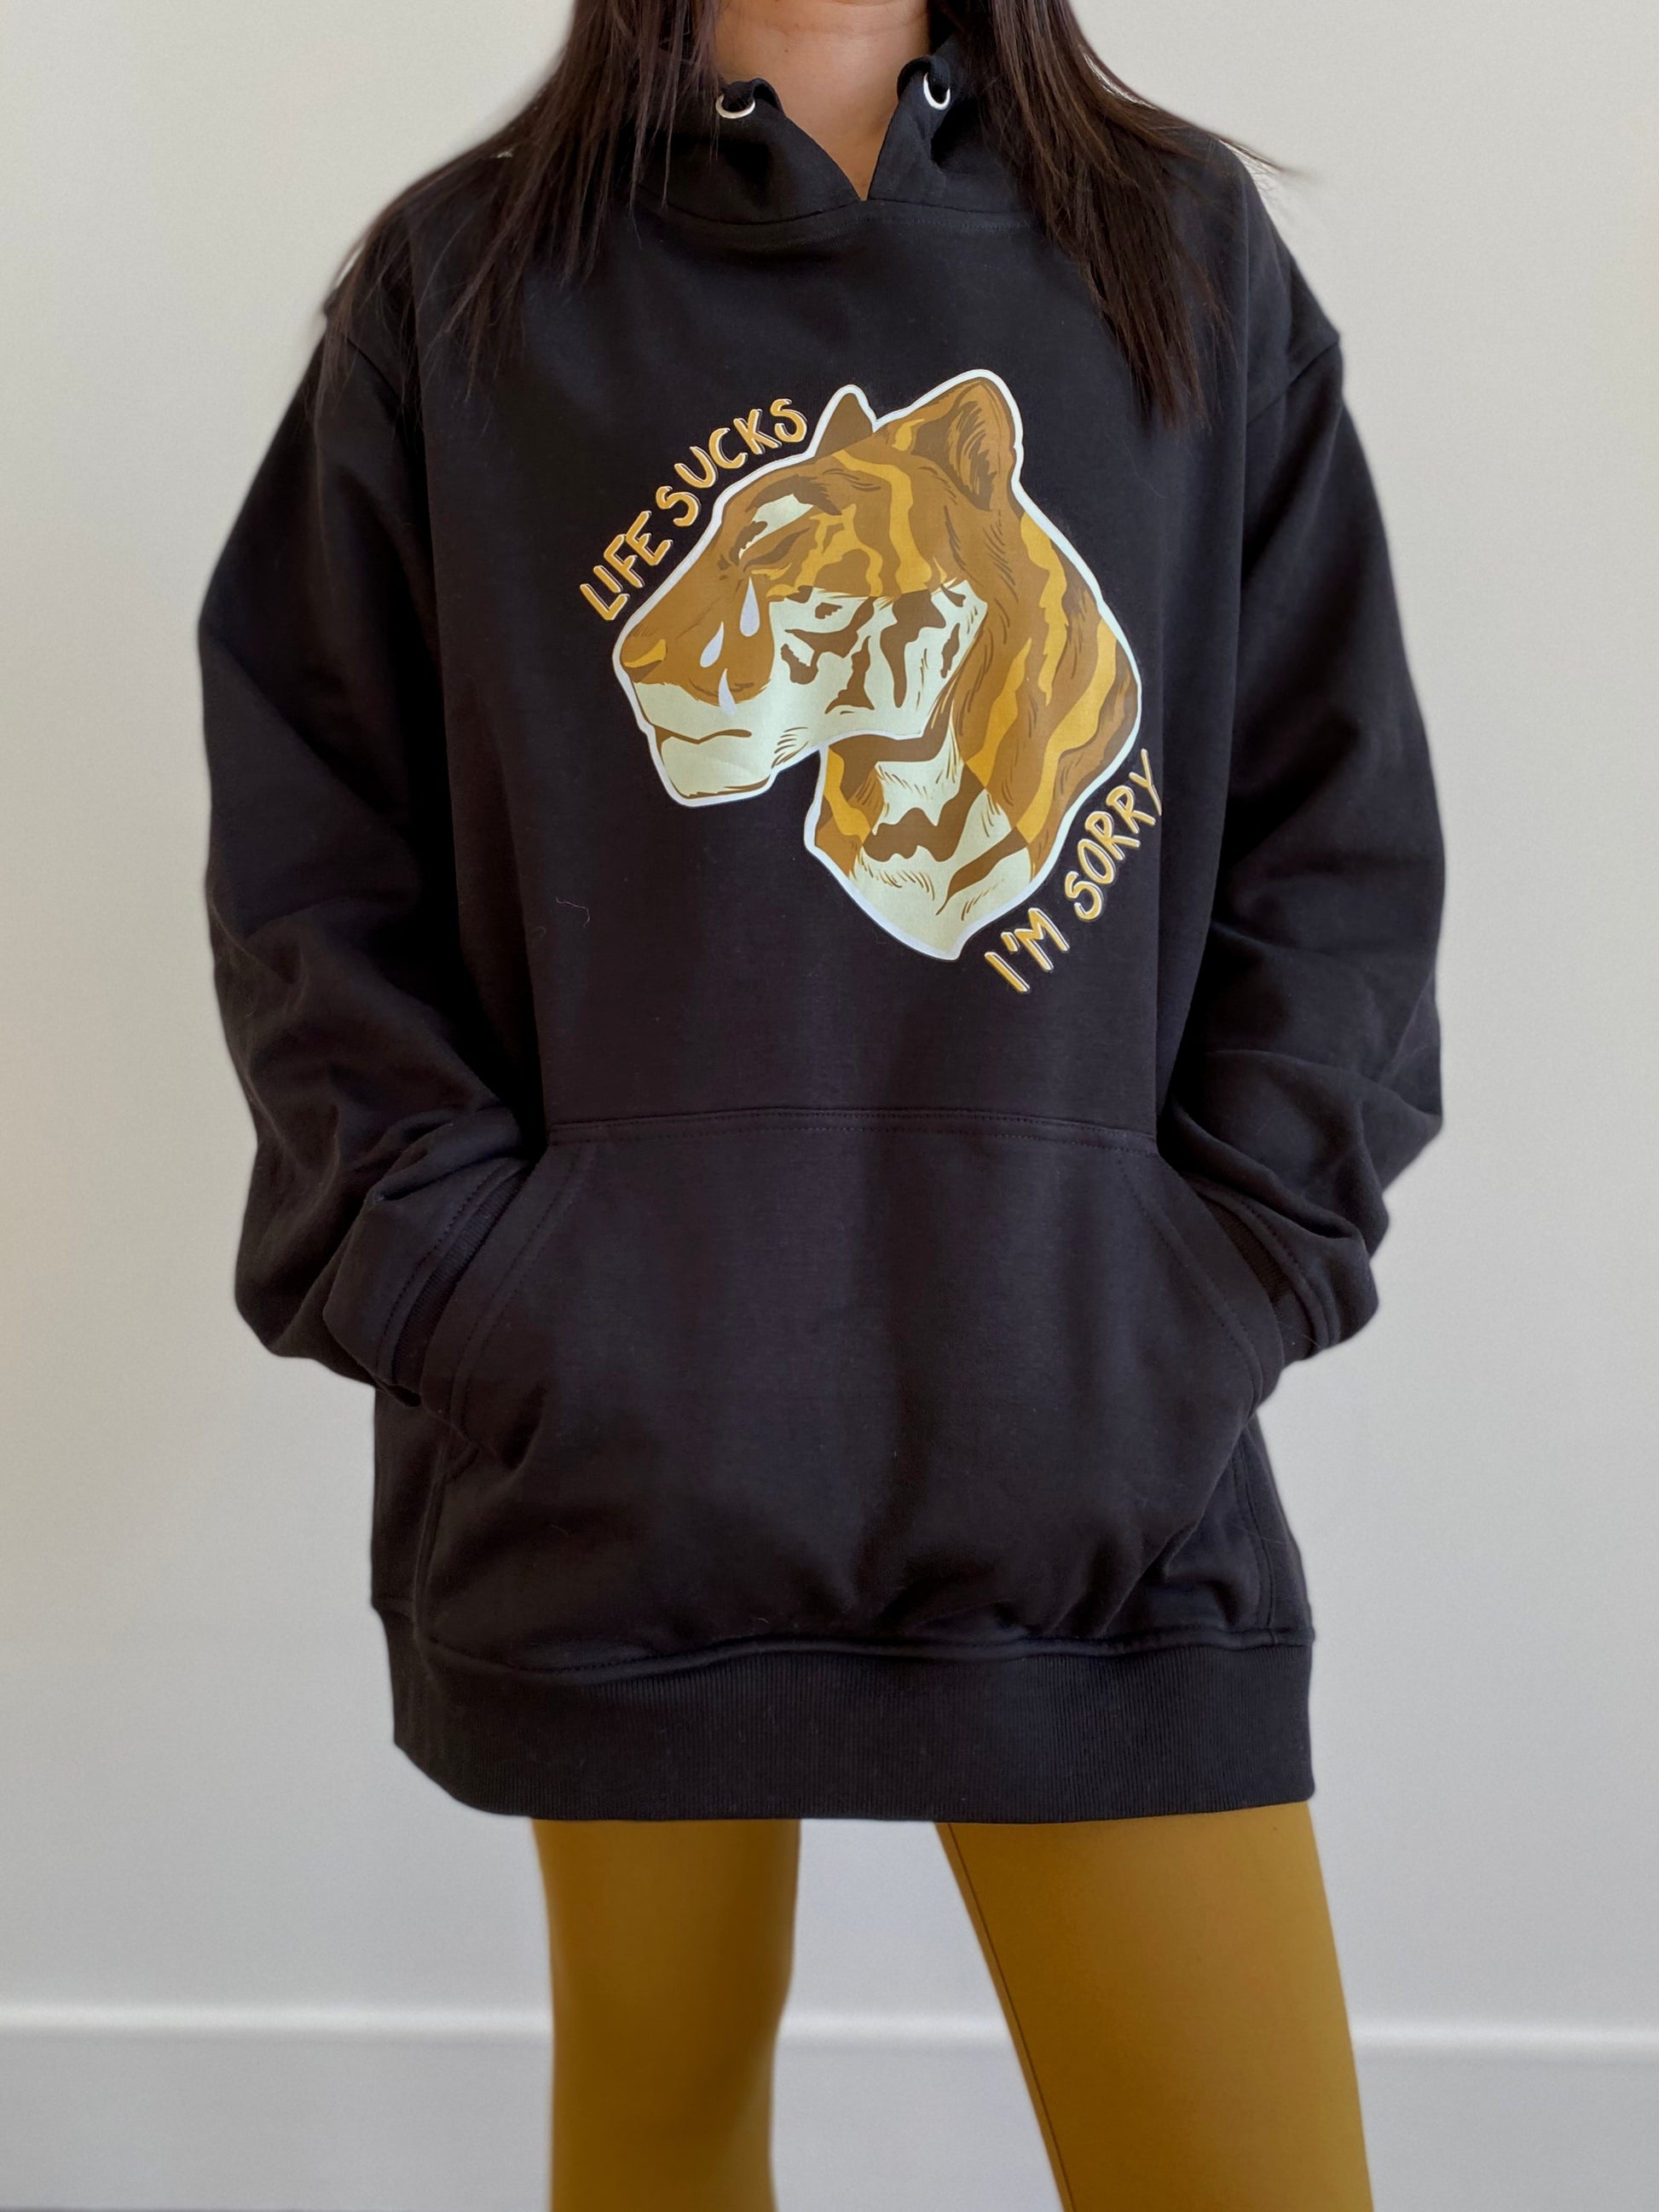 "Life sucks, I'm sorry" gold tiger design on black hoodie designed and illustrated by floral tattoo artist Lu Loram Martin, in Toronto, Canada.